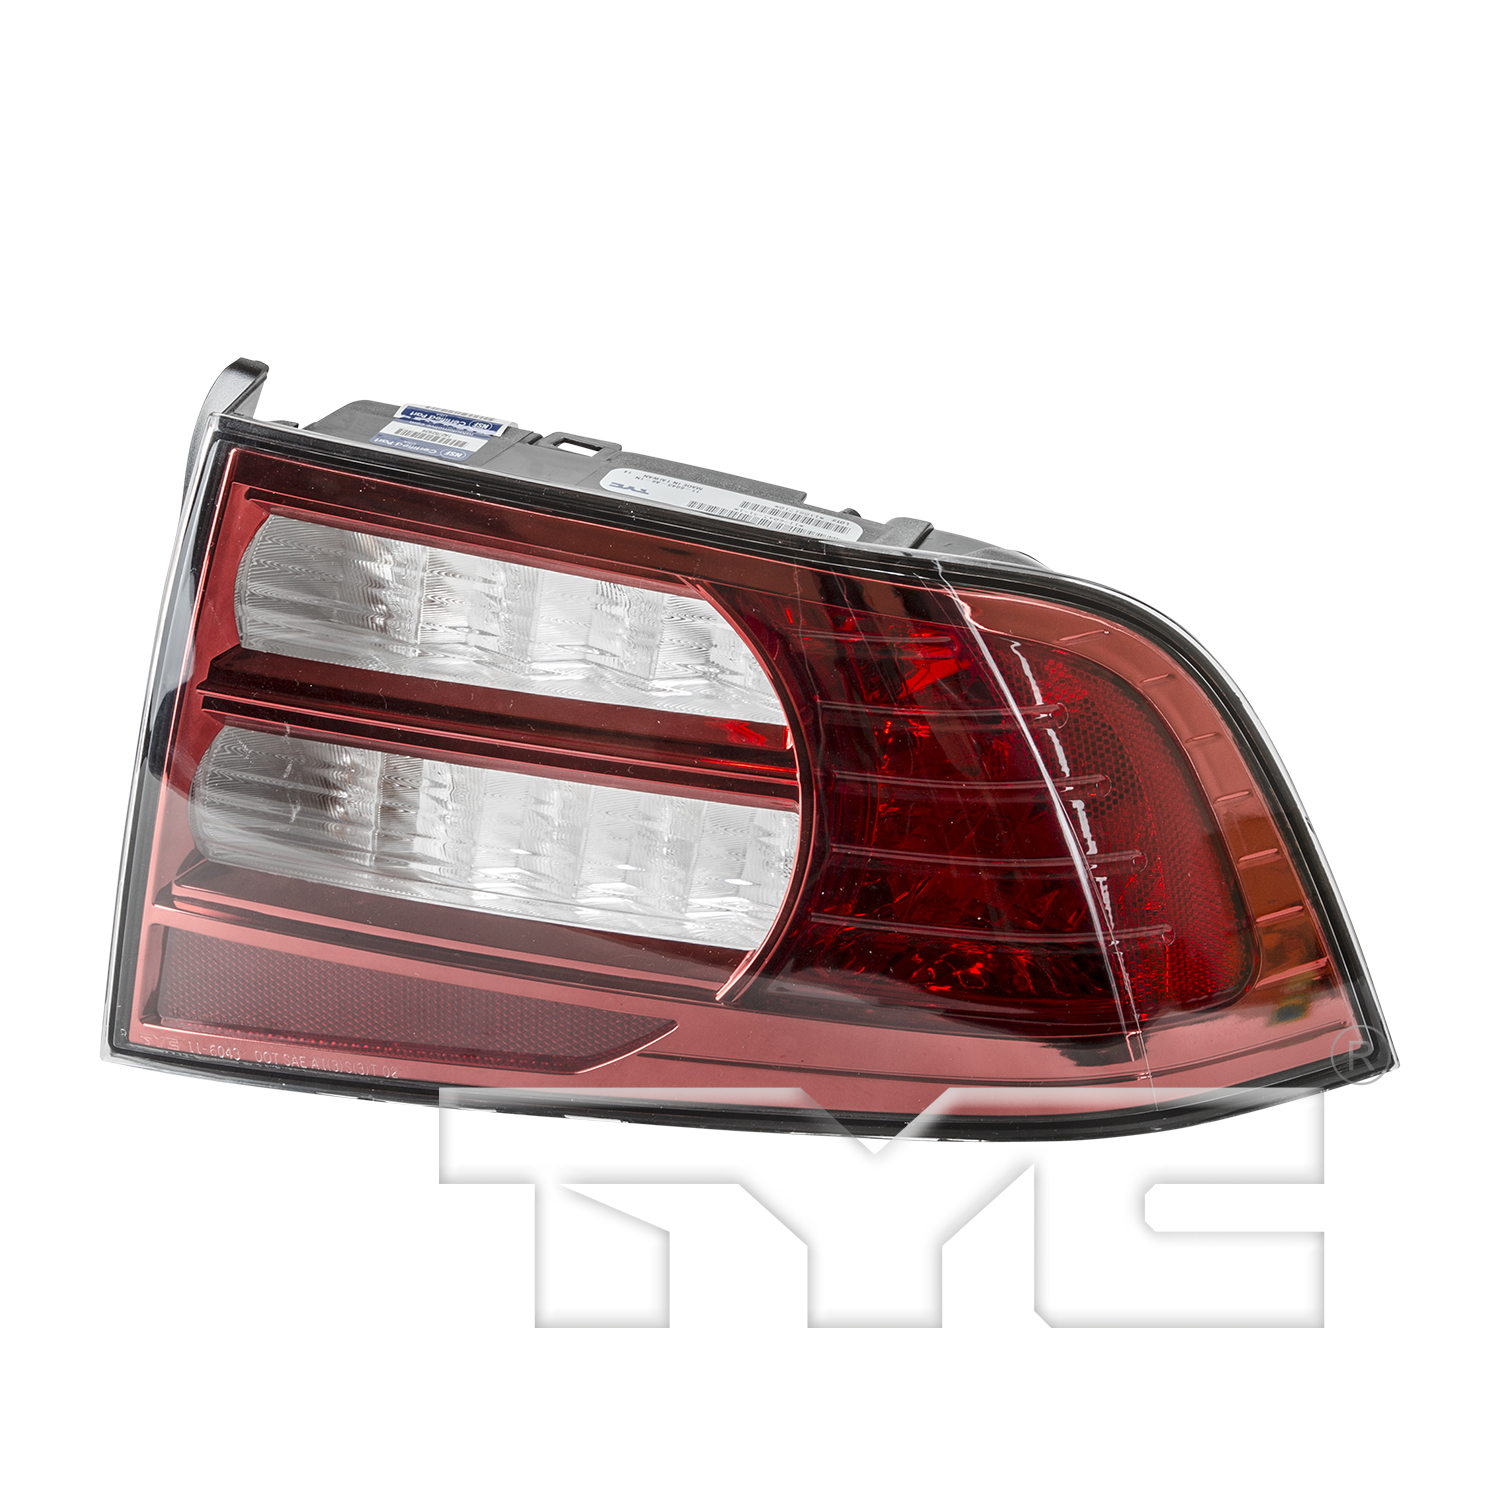 Aftermarket TAILLIGHTS for ACURA - TL, TL,07-08,RT Taillamp lens/housing